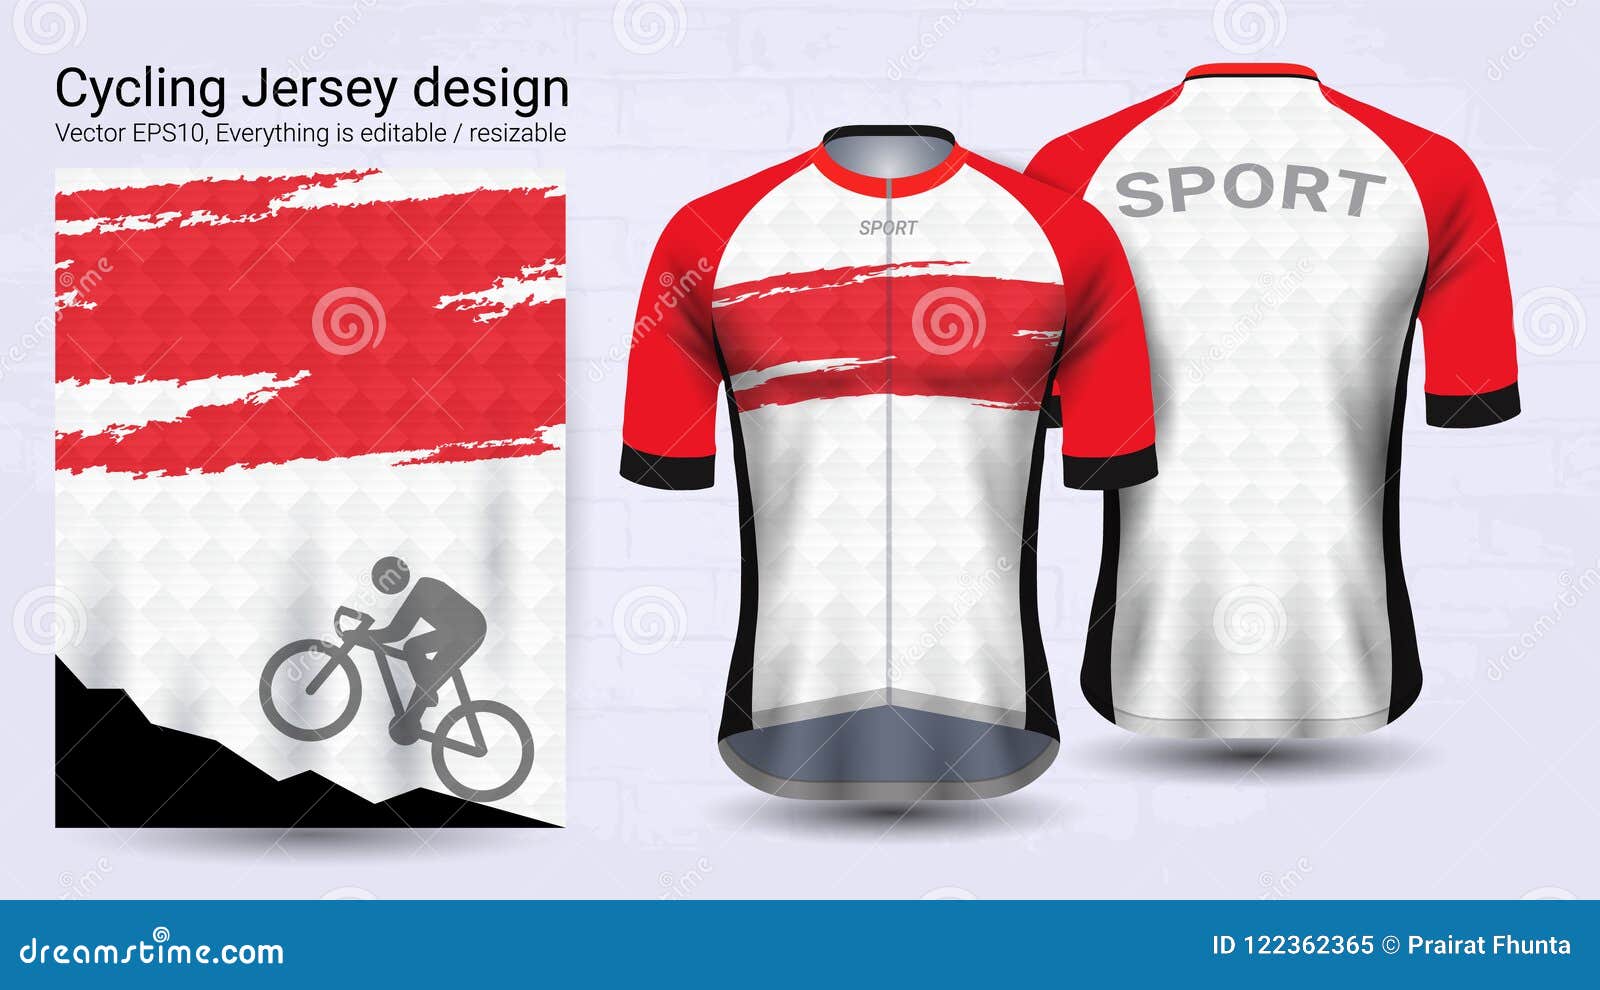 Download Cycling Jerseys, Short Sleeve Sport Mockup Template, Graphic Design For Bicycle Apparel Or ...